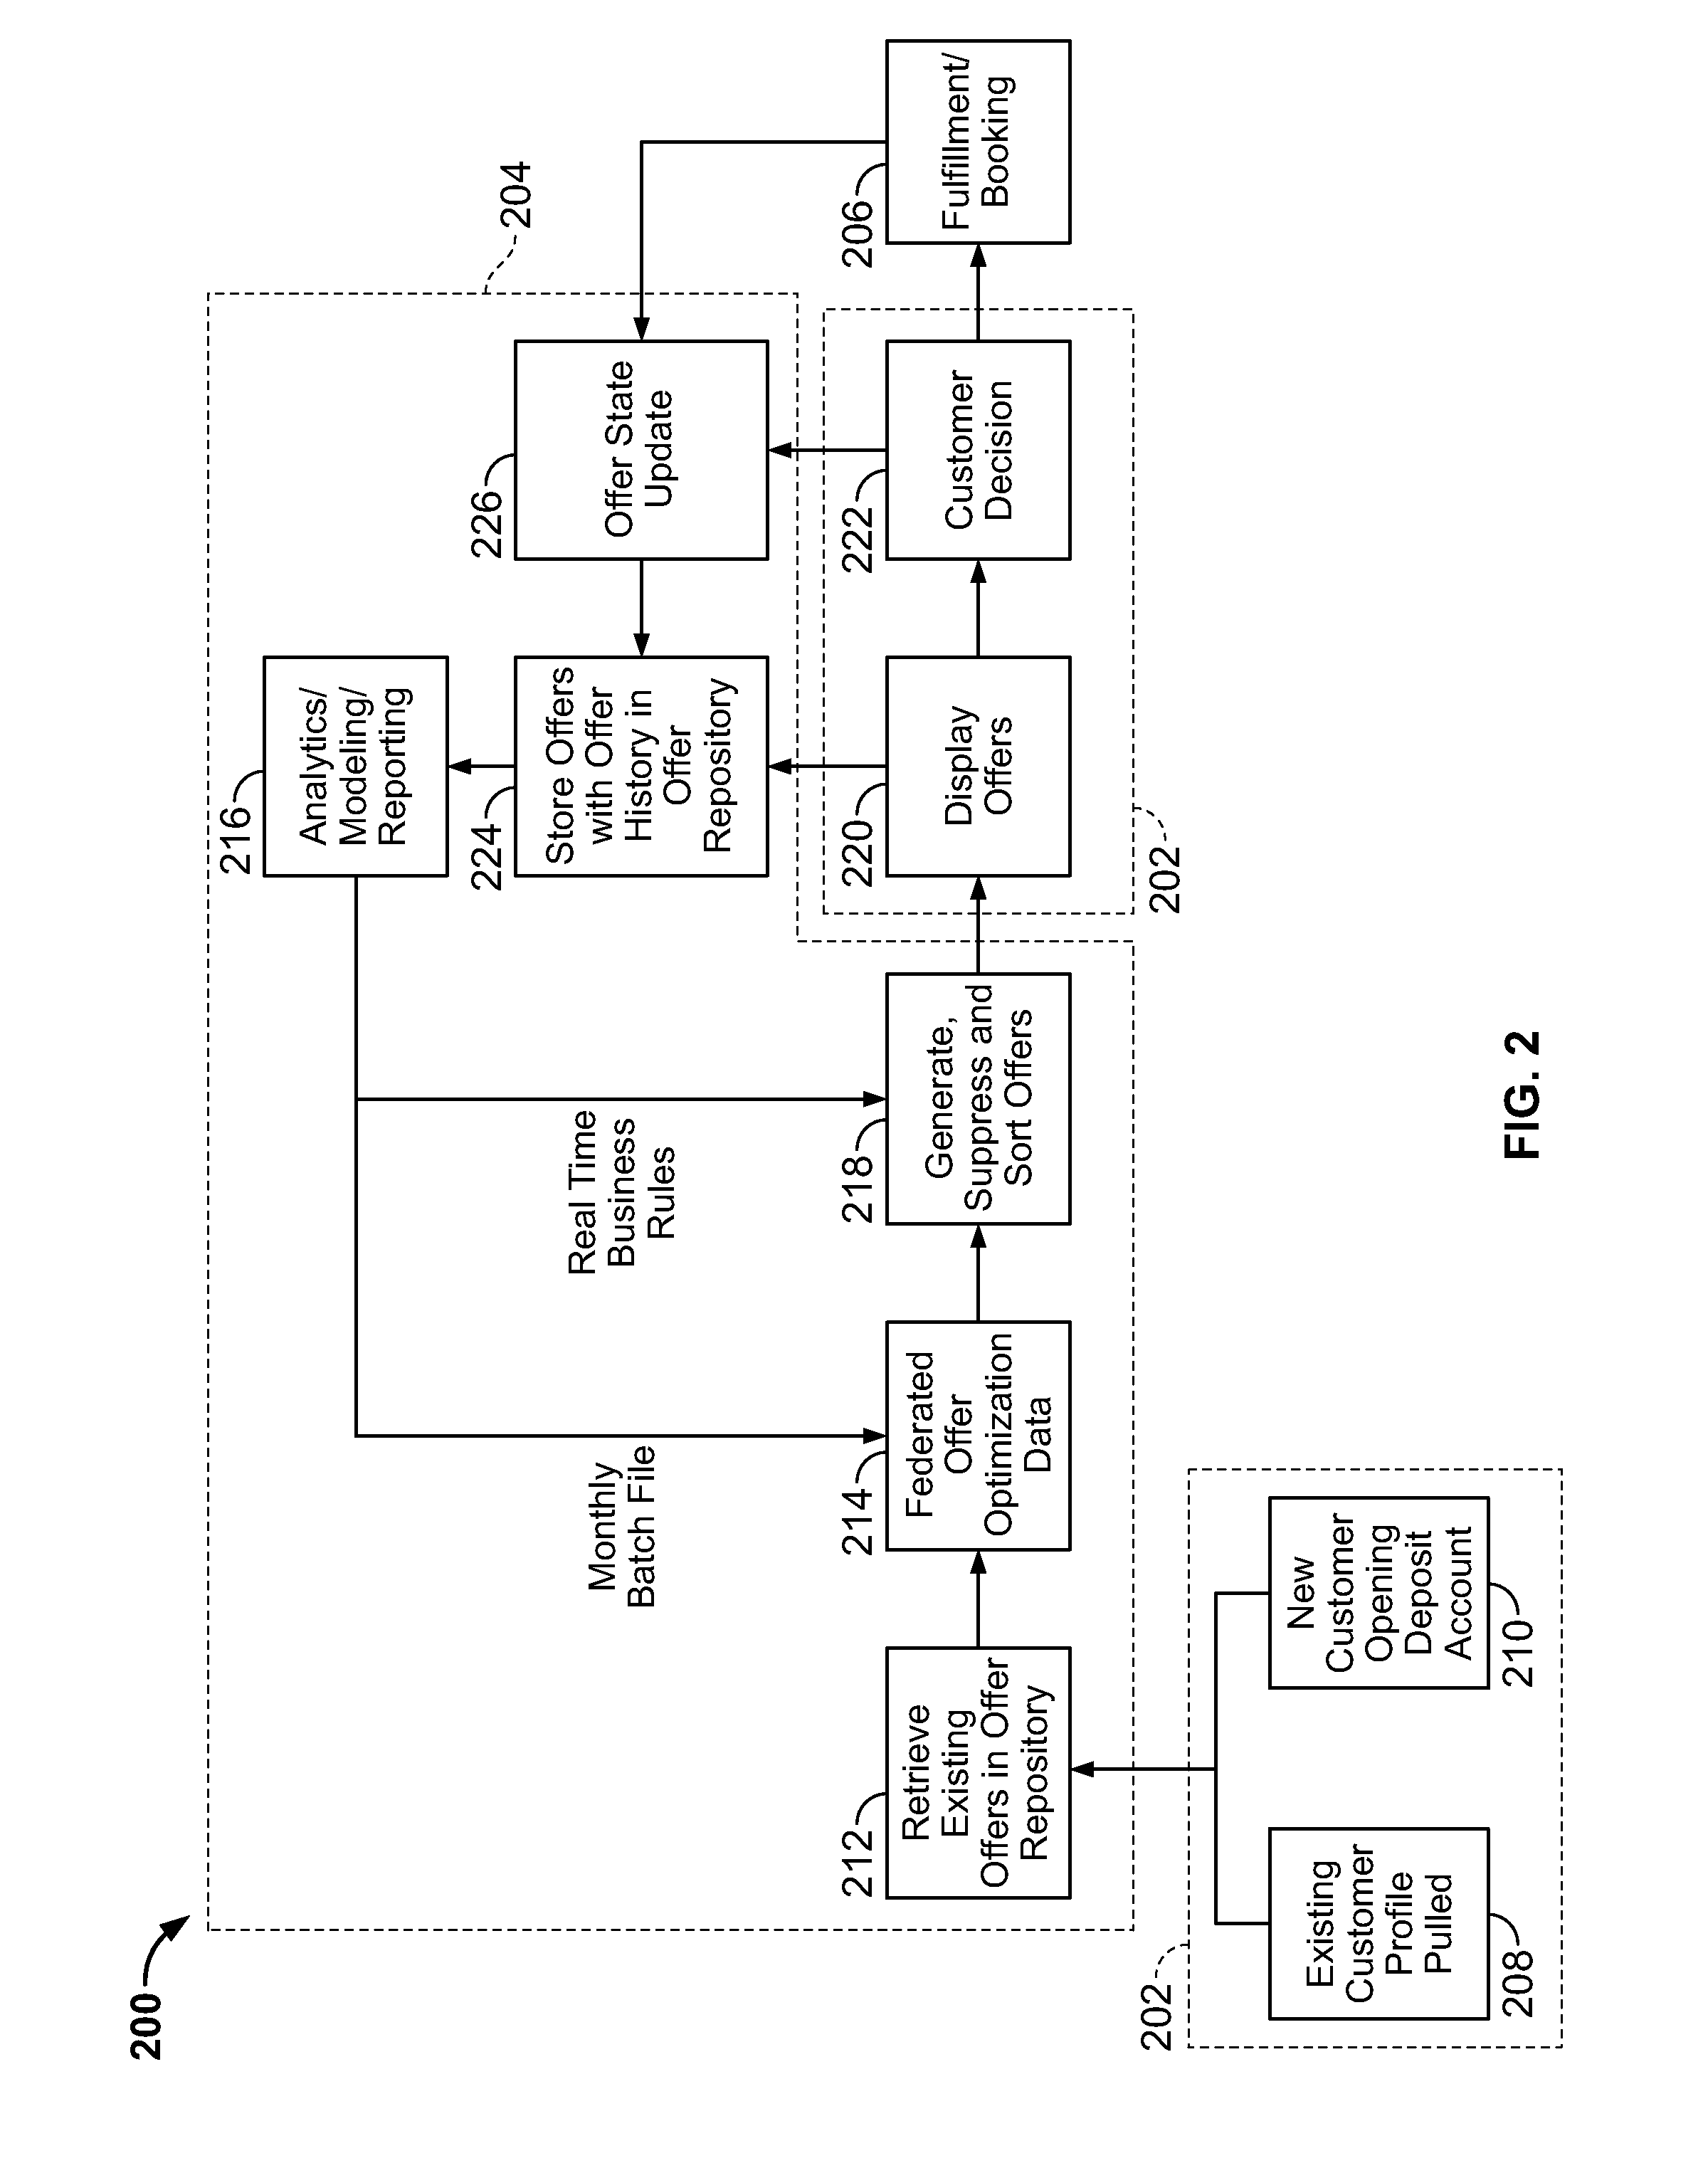 Apparatus and methods for customer interaction management